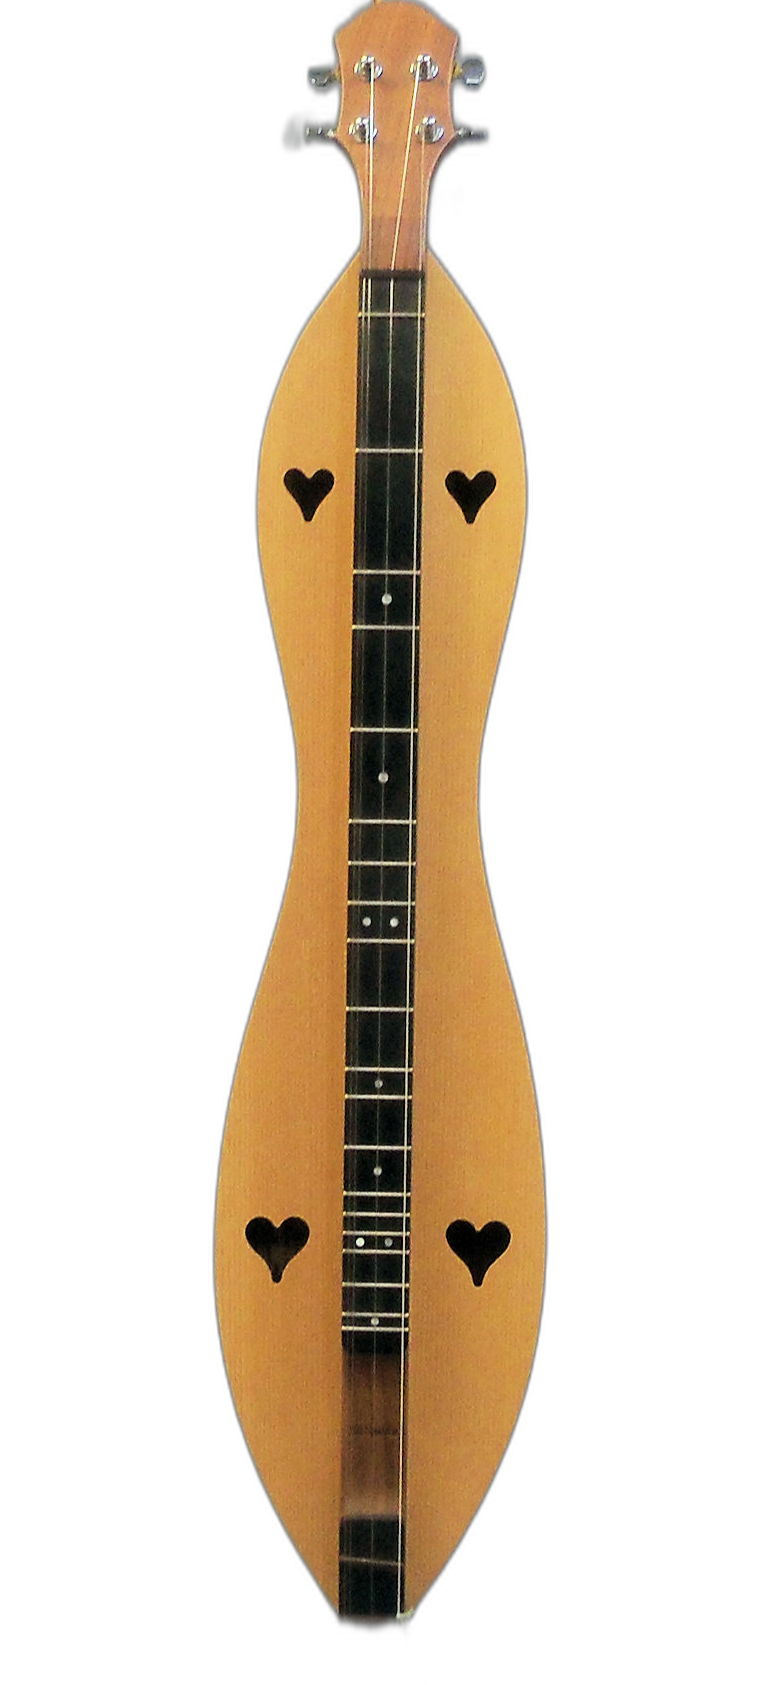 26" 4 String, Flathead, Hourglass with Walnut back, sides and Spalted, Clear or Quartersawn Sycamore top (4FH26WSY) Image shown with upgraded Ebony fretboard (add $140)